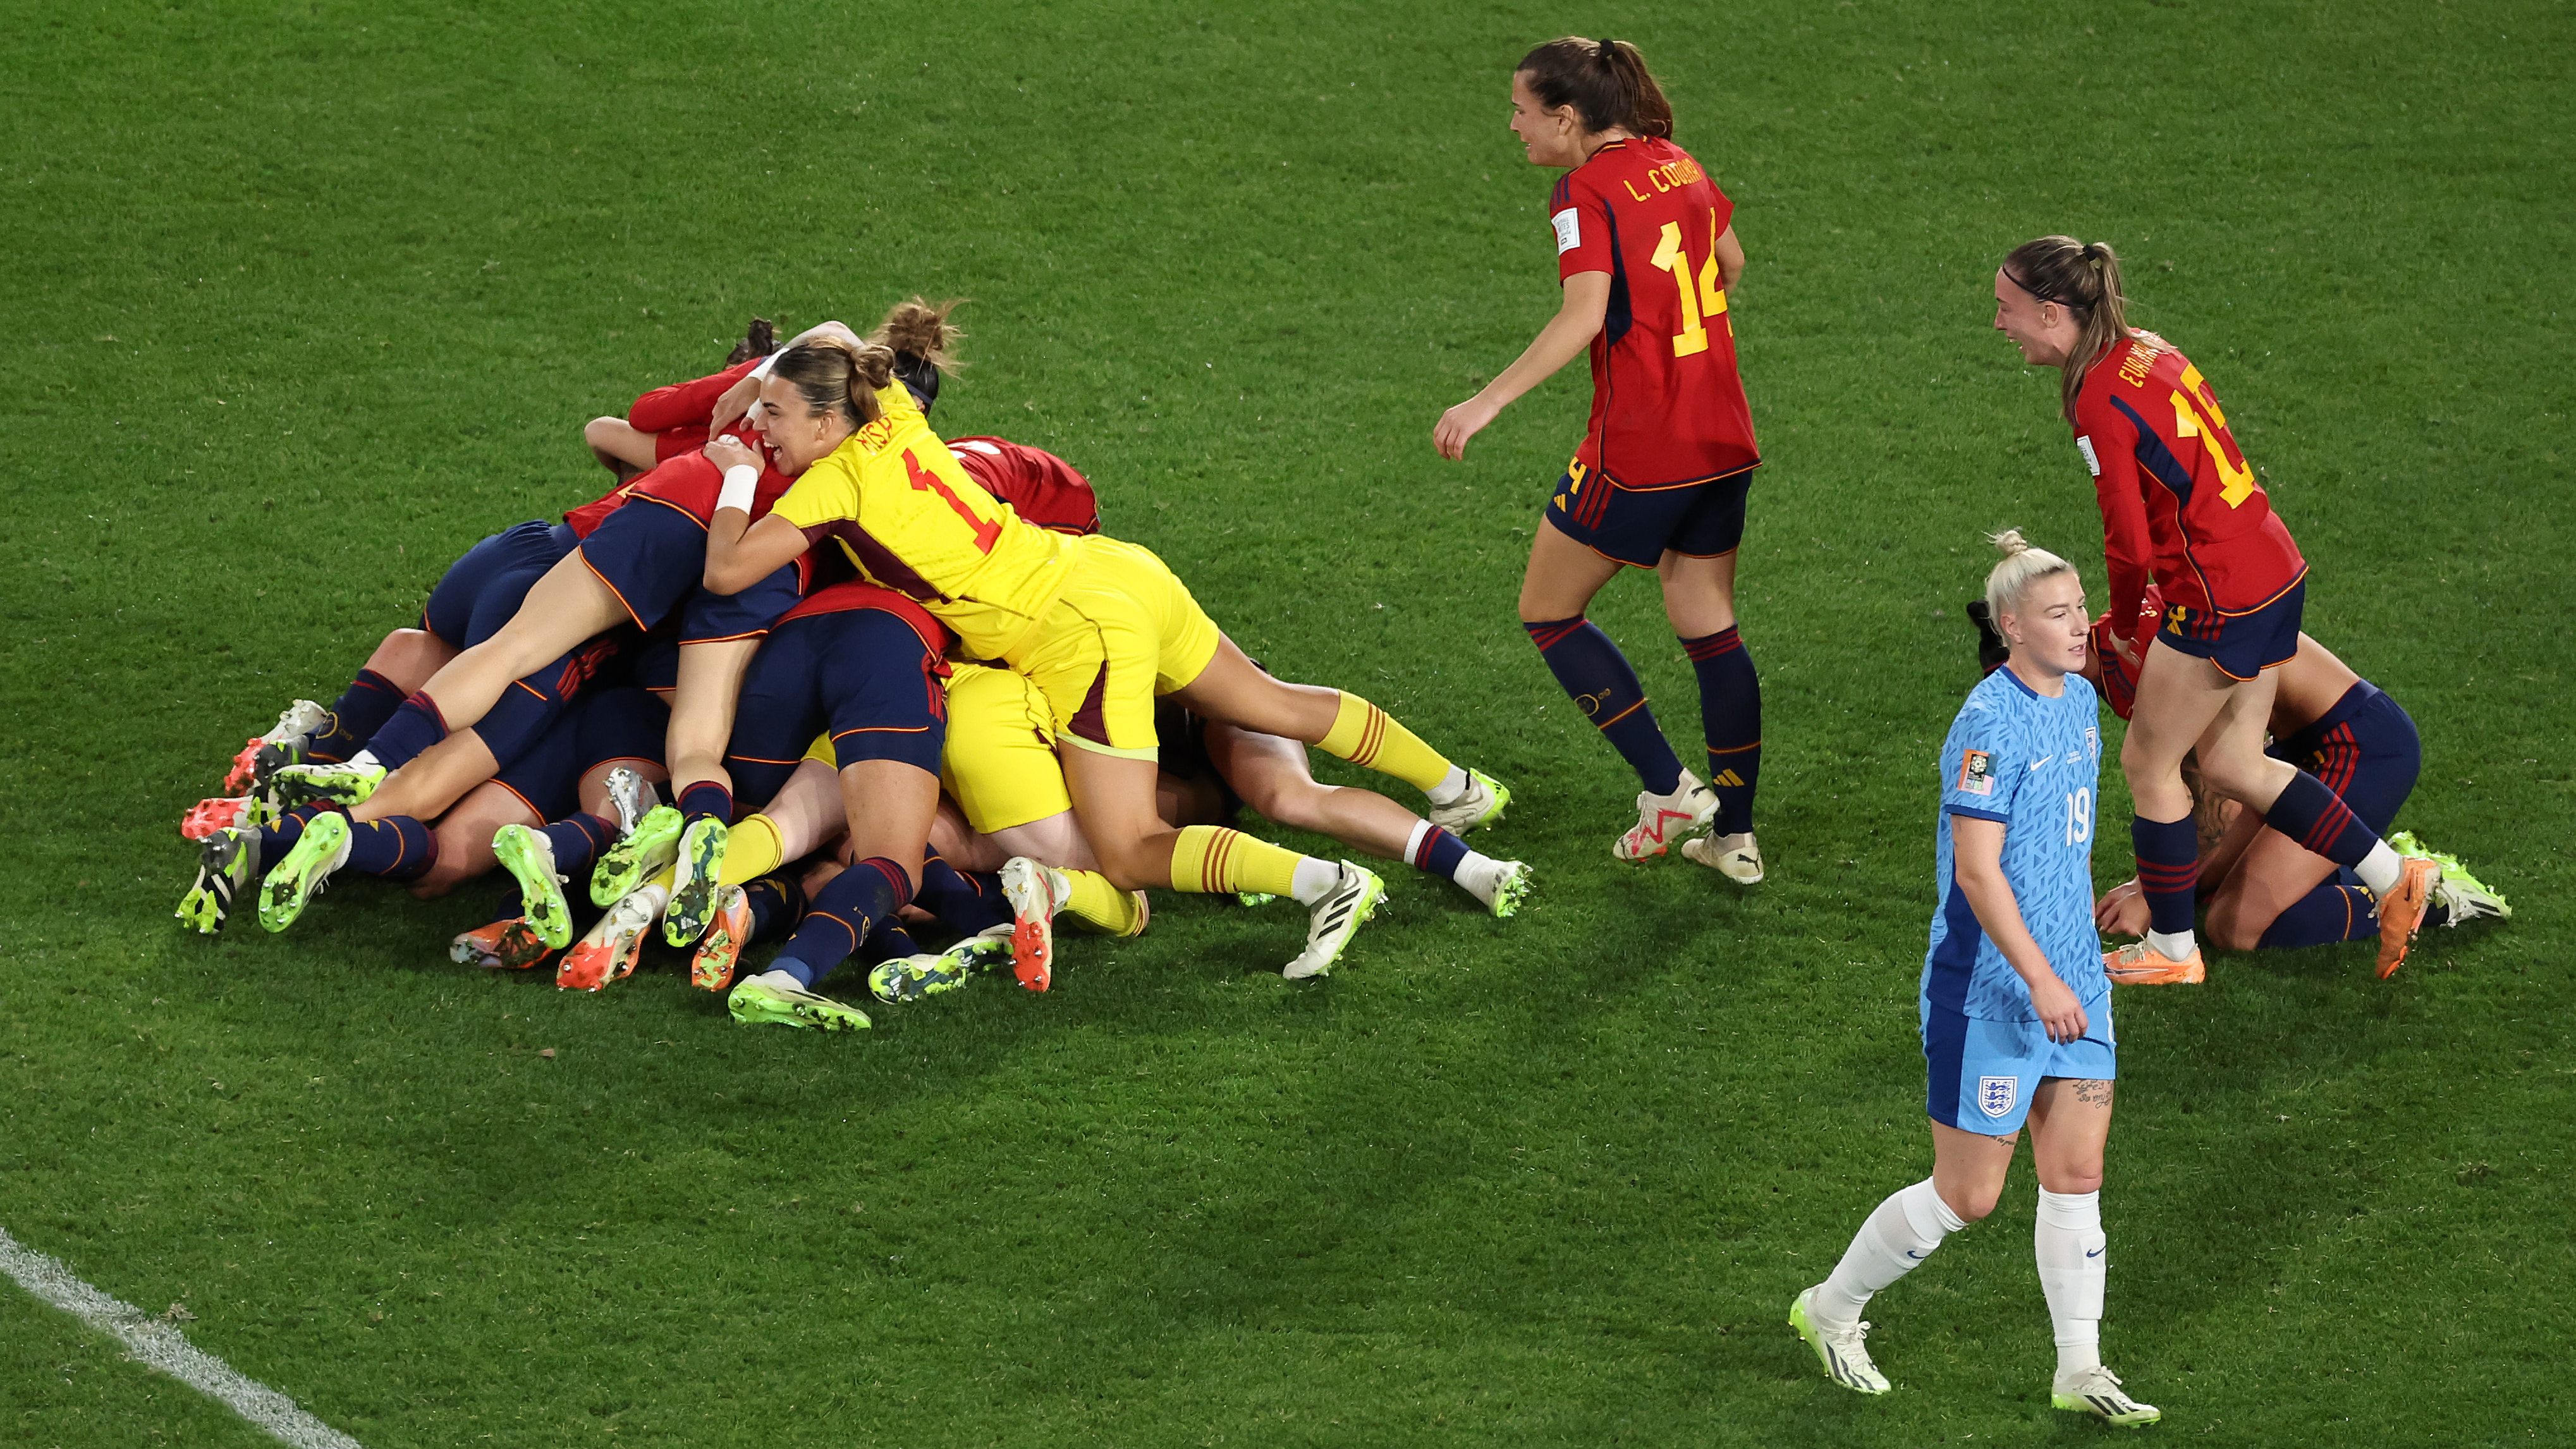 Women's World Cup Final: Spain Beats England to Win Its First